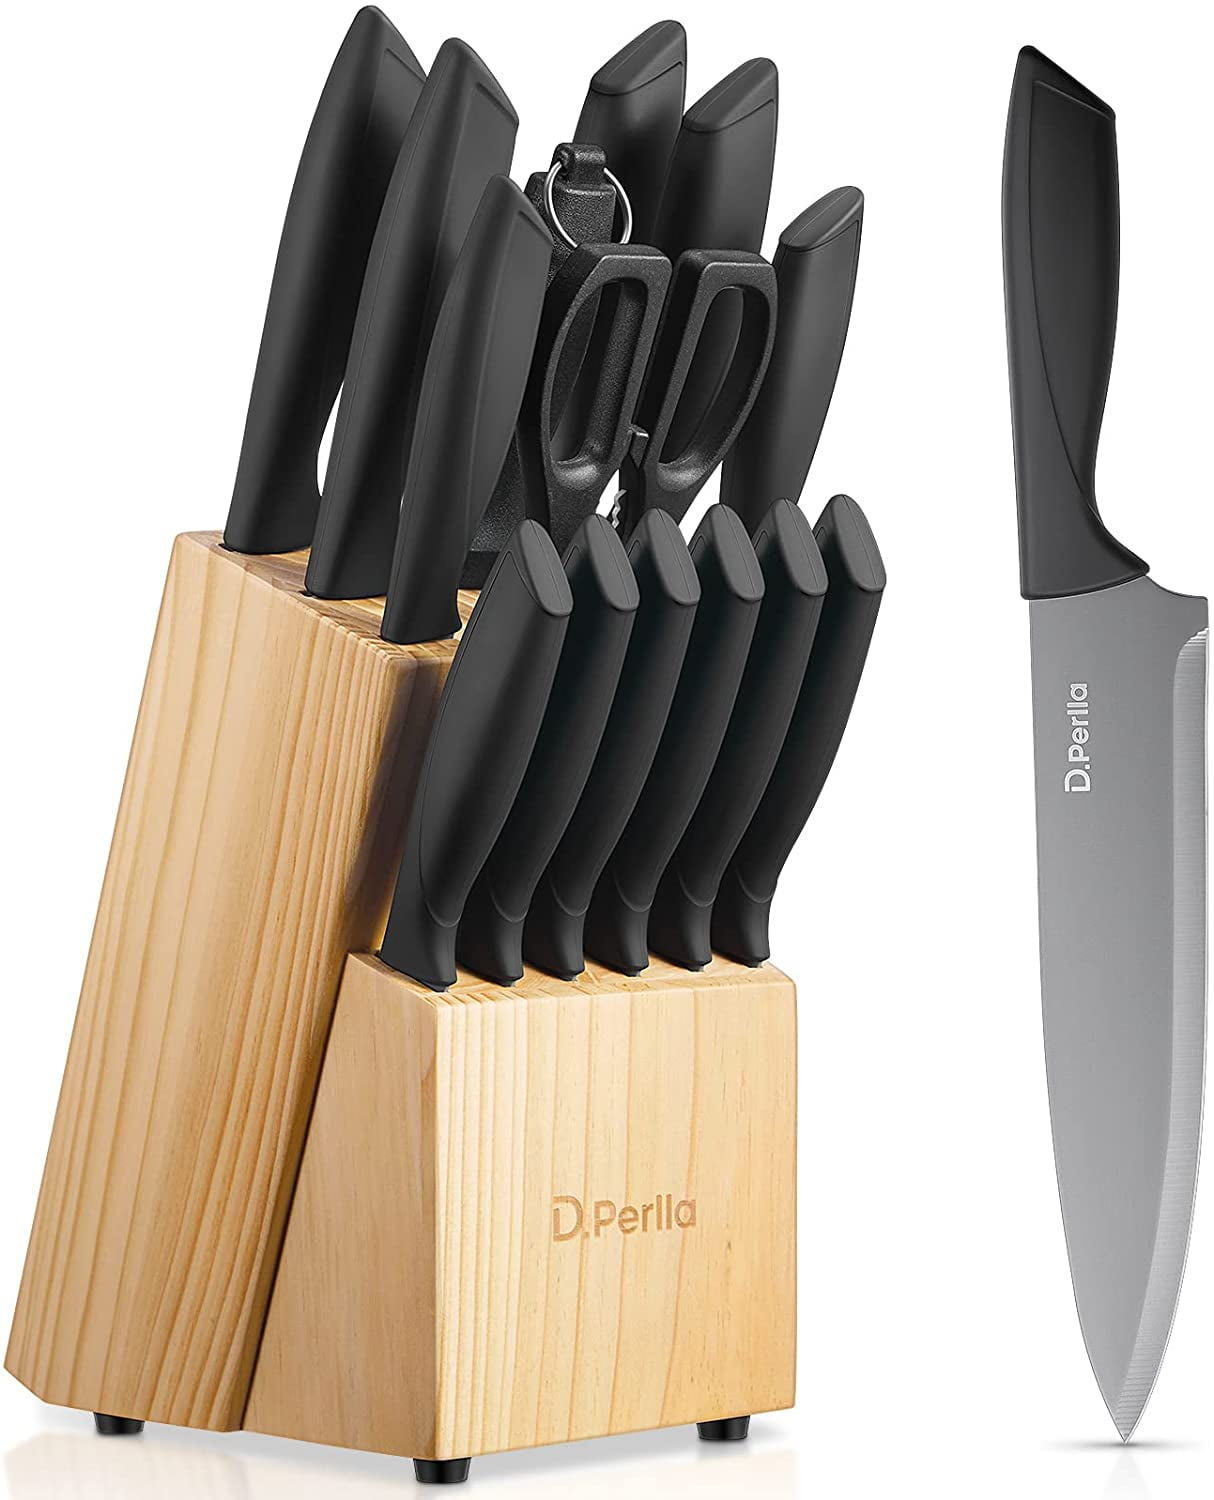 DURA LIVING 3-Piece Colorful Floral Kitchen Knife Set - Nonstick Stainless  Steel Ultra Sharp 7 Inch Santoku, 5 Inch Utility, 3.5 Inch Paring Cooking